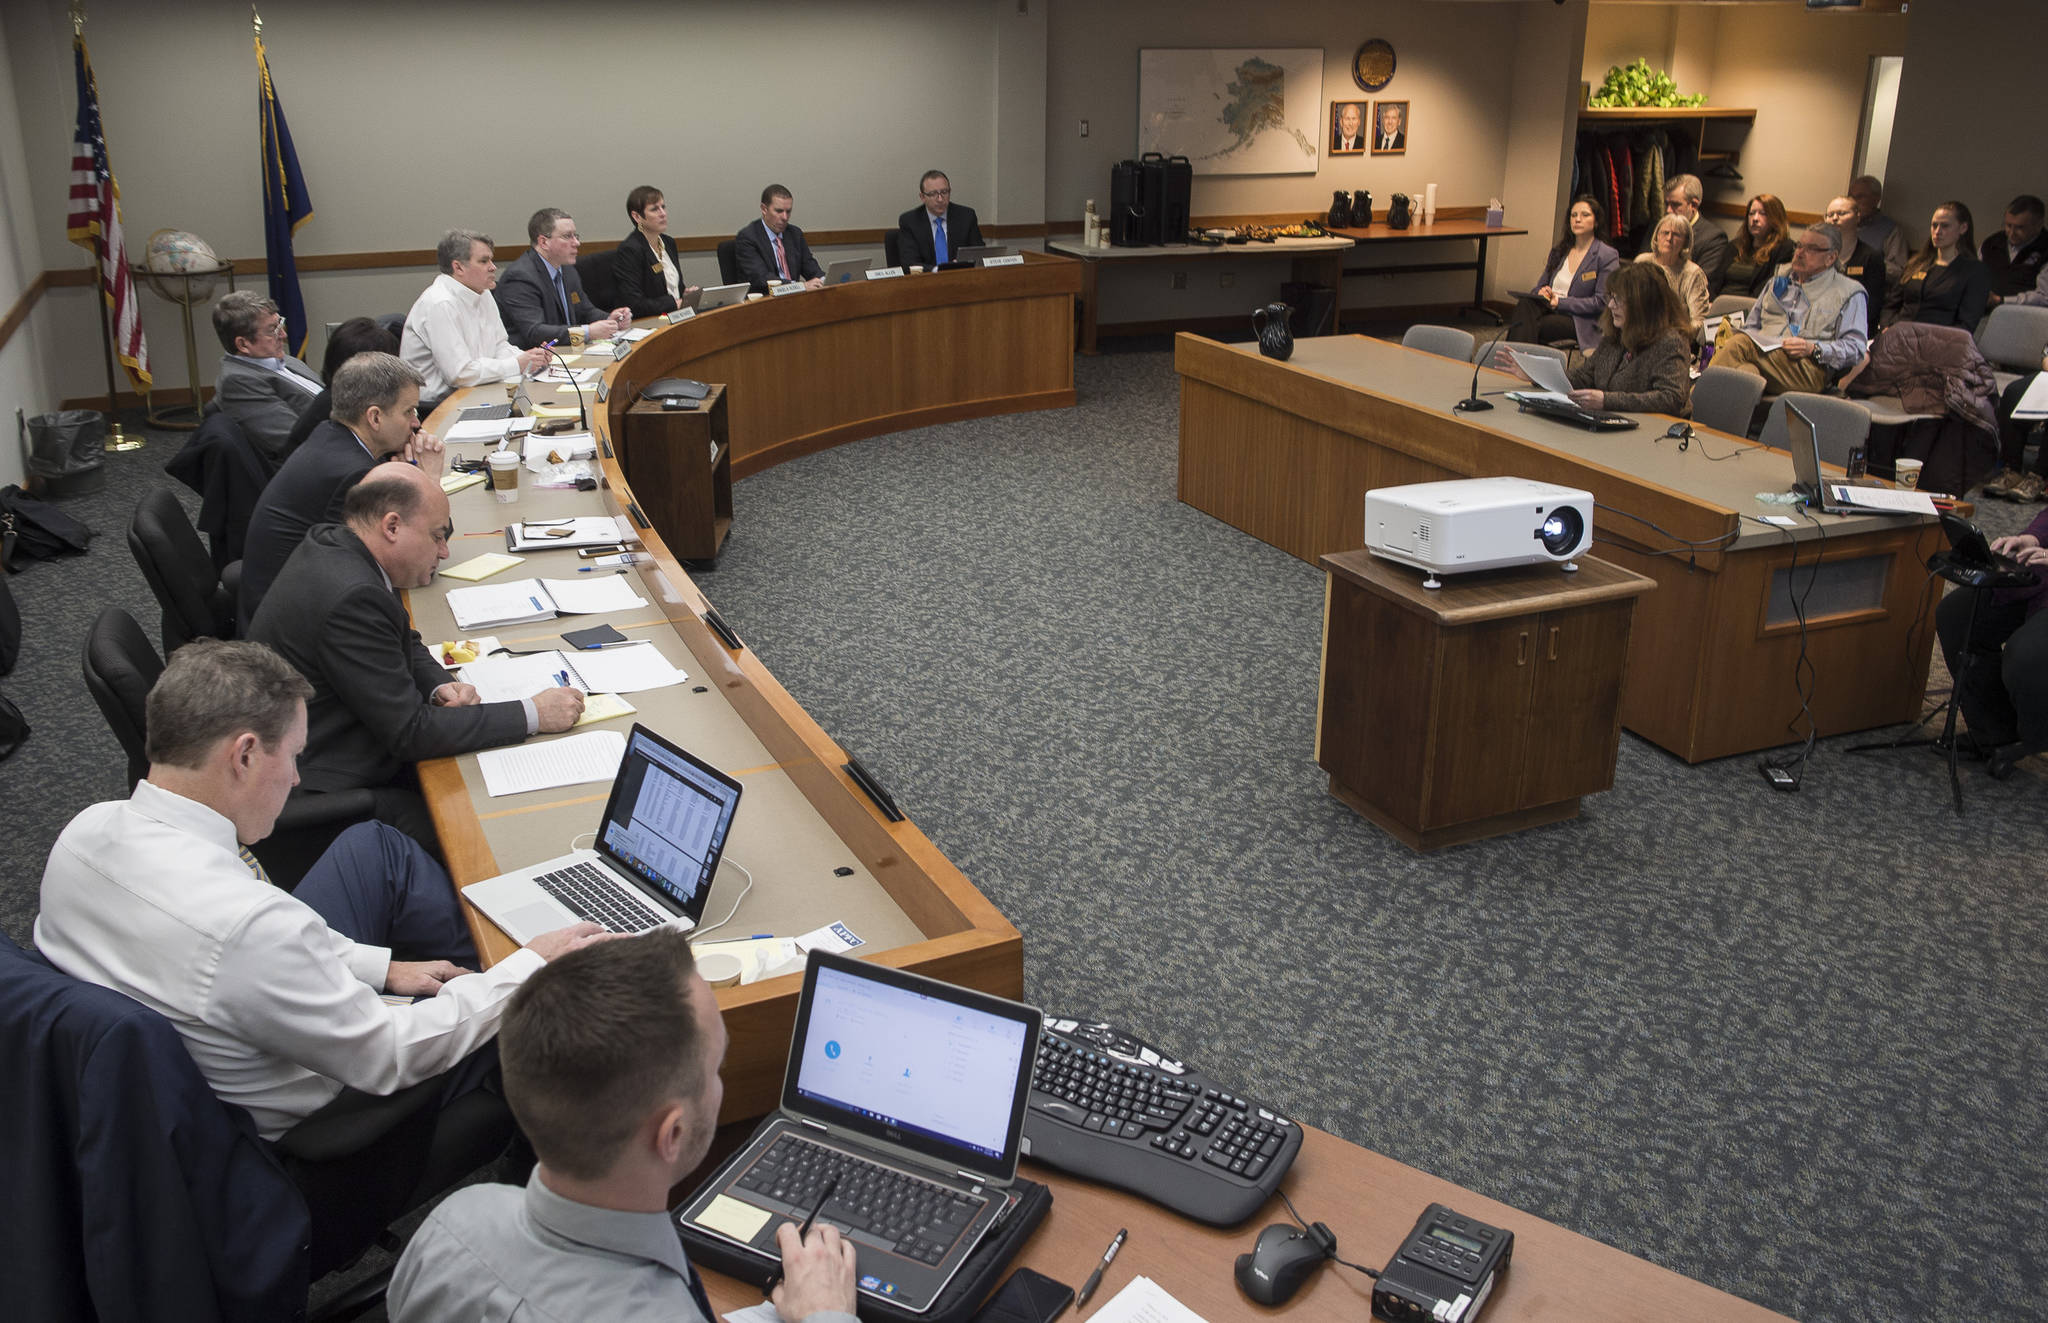 The Alaska Permanent Fund Corporation’s Board of Trustees listens to public testimony on divesting from fossil fuel investments during its quarterly meeting in Juneau on Wednesday, Feb. 21, 2018.